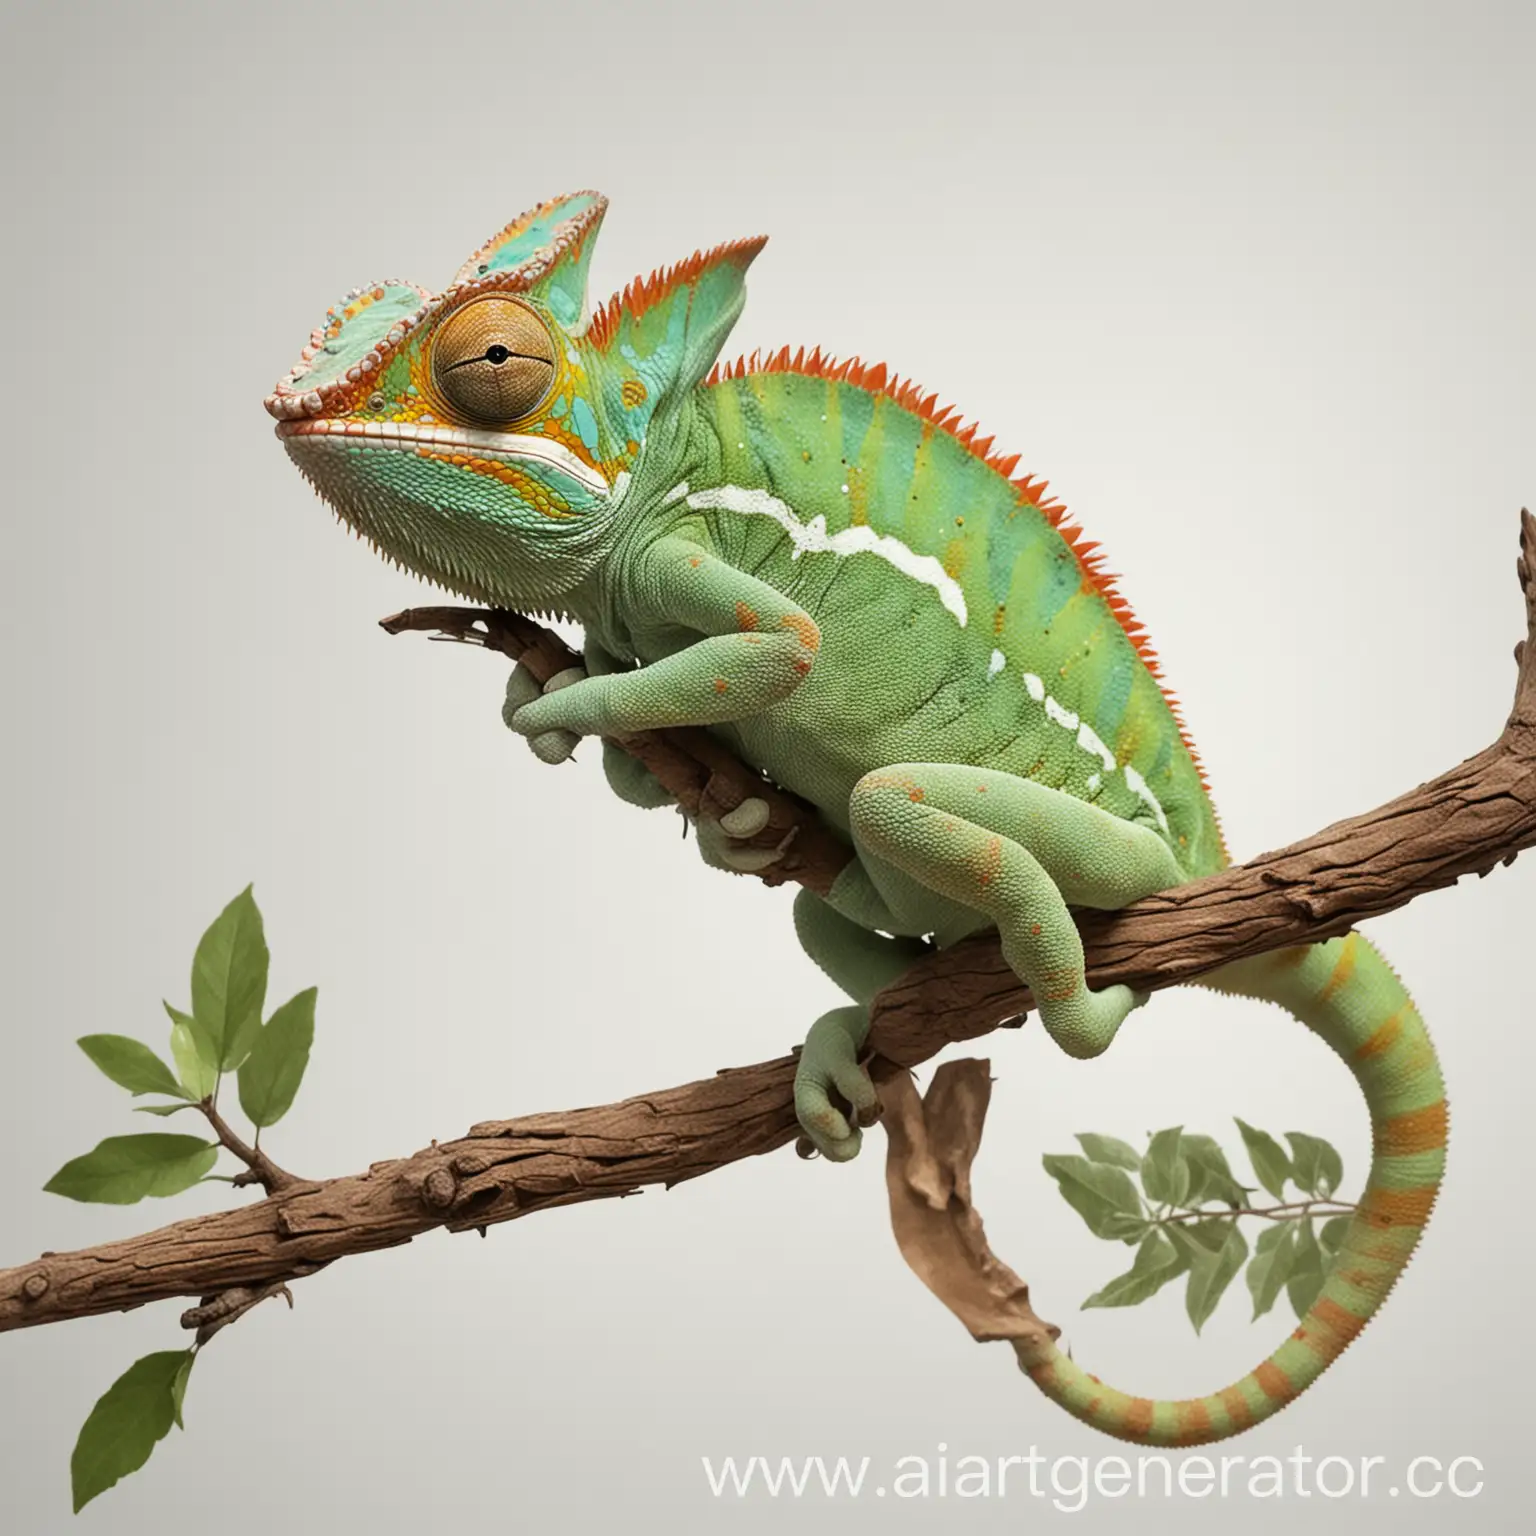 Cartoon-Chameleon-on-Branch-with-White-Background